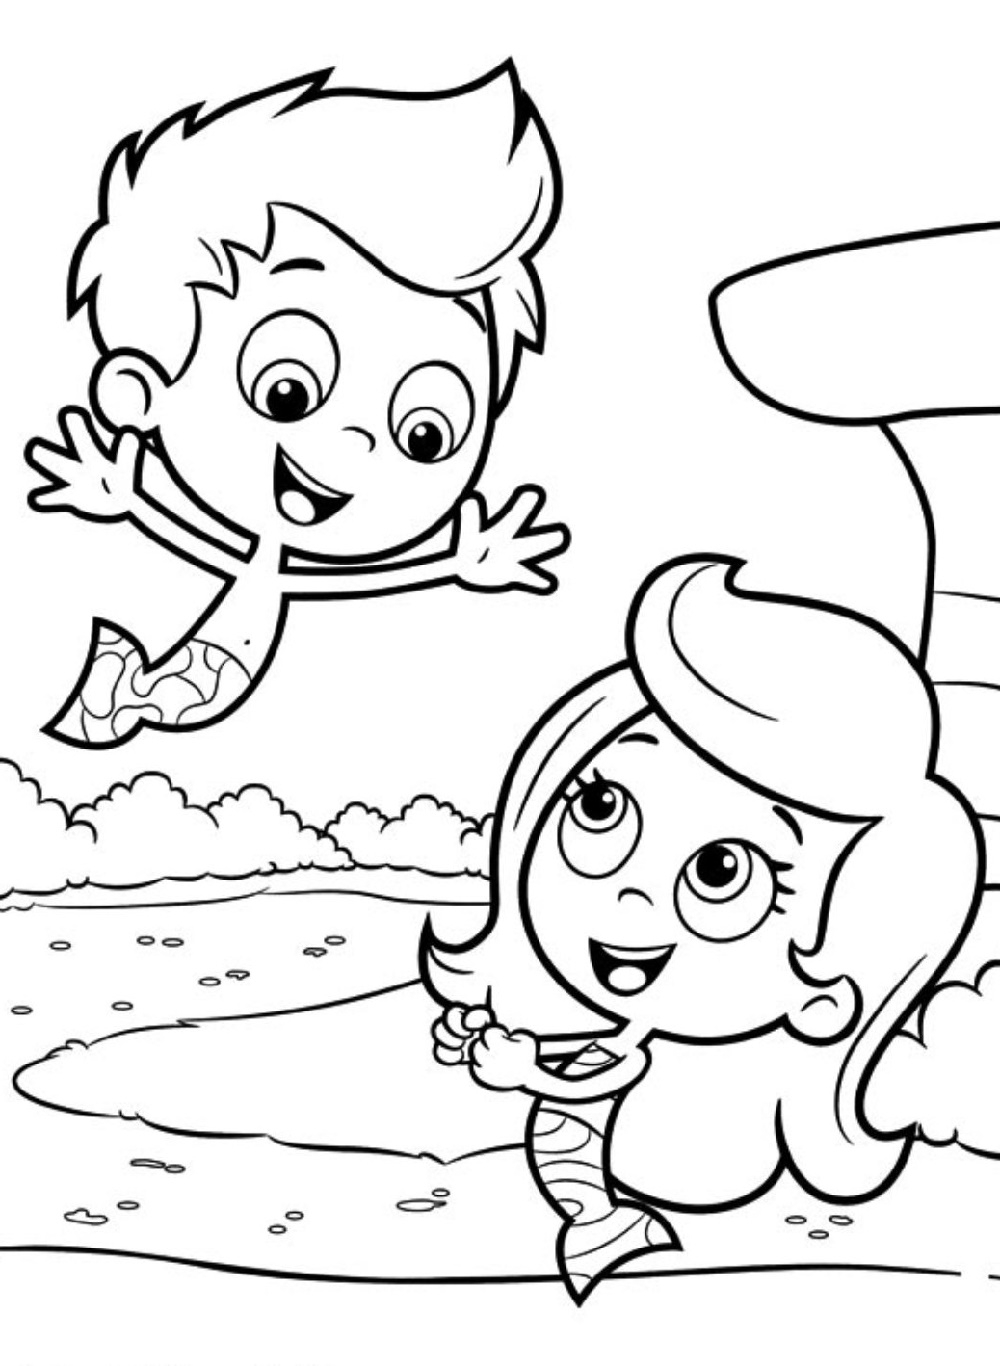 Printable Bubble Guppies Coloring Pages Bubble Guppies Coloring Pages Free K5 Worksheets